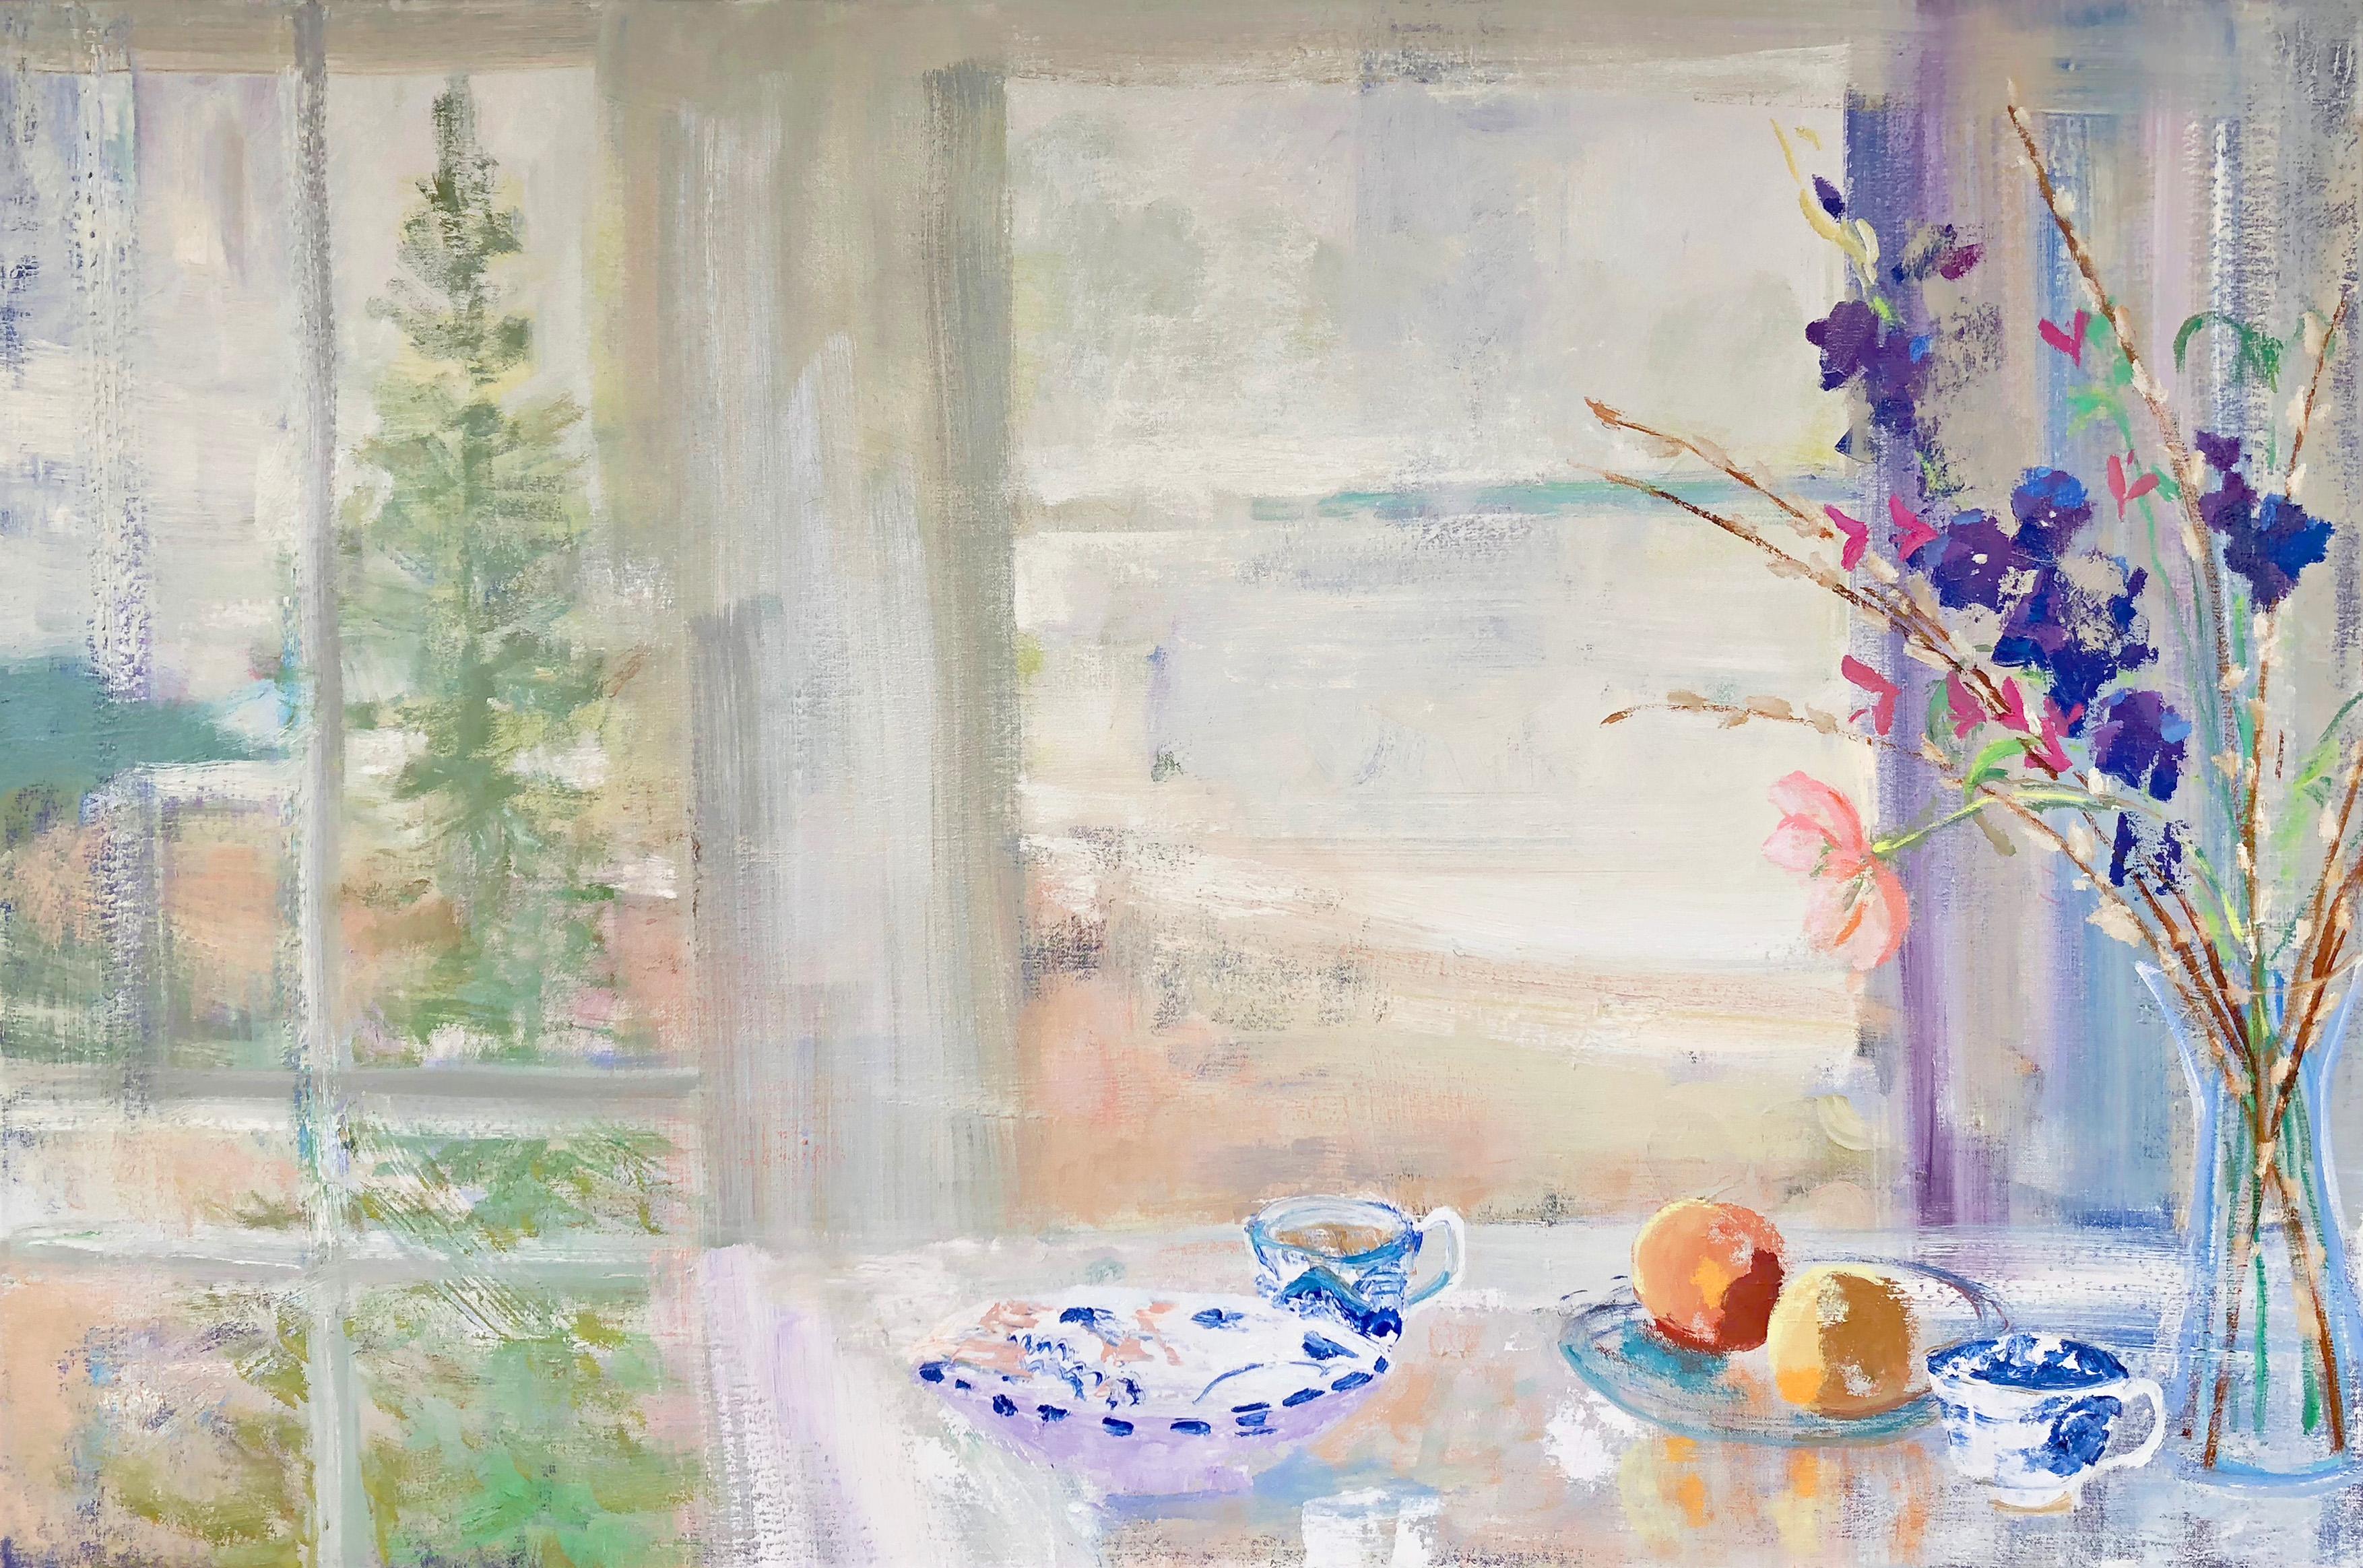 In this light and inviting interior scene, a still life arrangement of flowers and pussy willow in glass vase next to two fruits and two blue and white painted tea cups allude to an afternoon of tea with a loved one. The window in the background